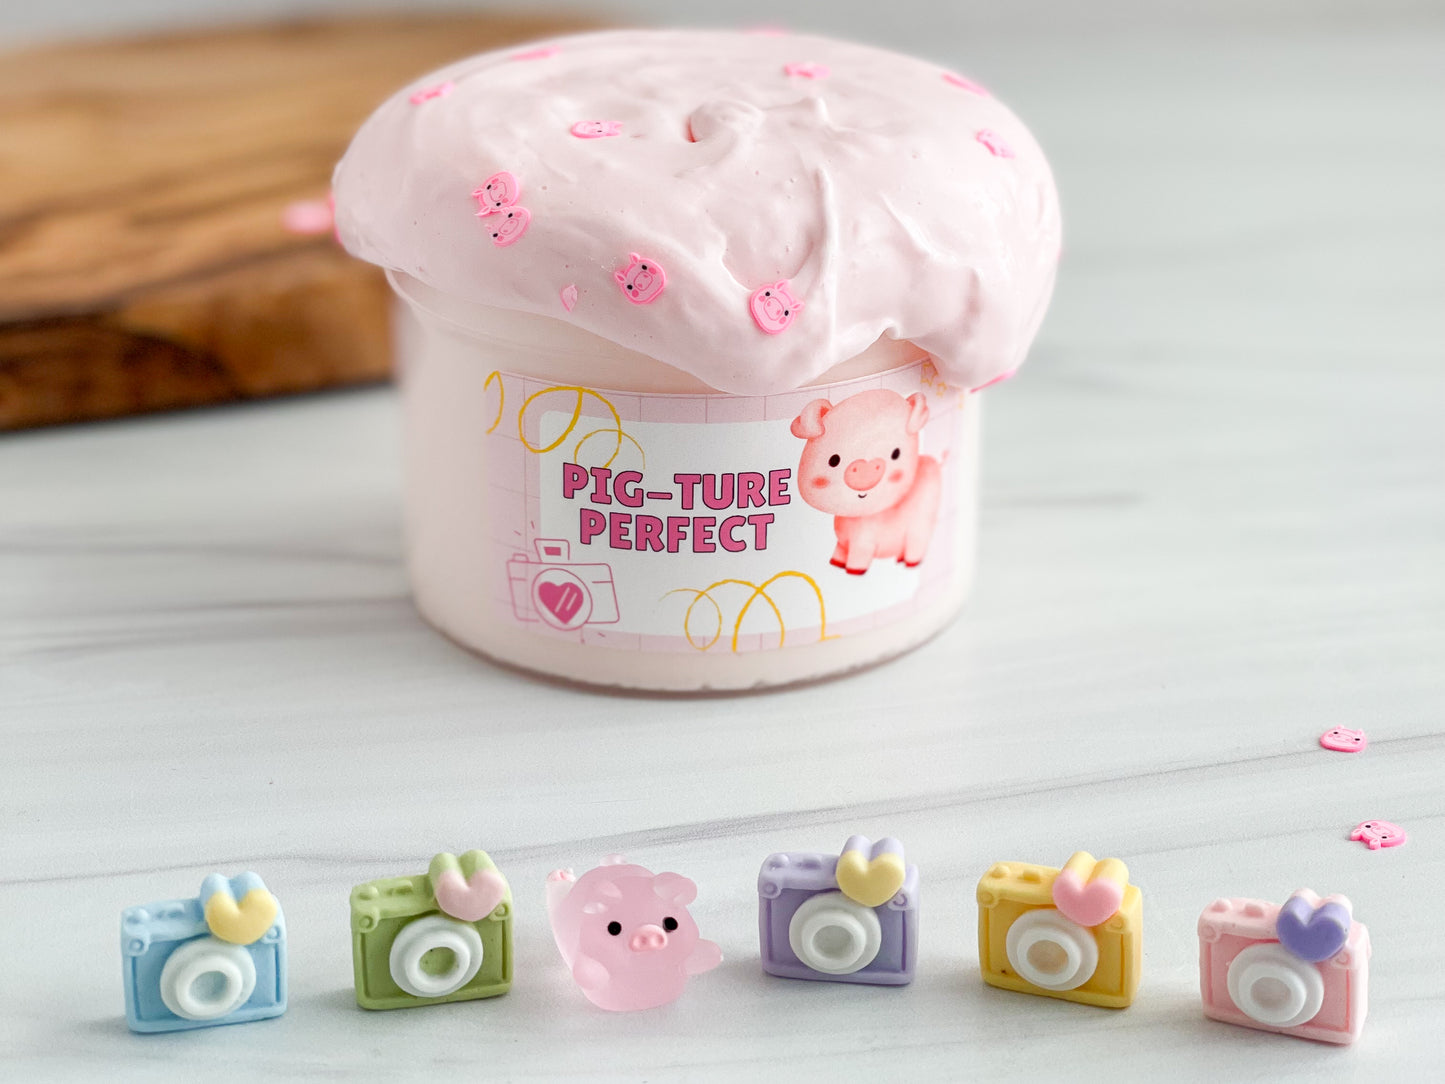 Pig-ture Perfect